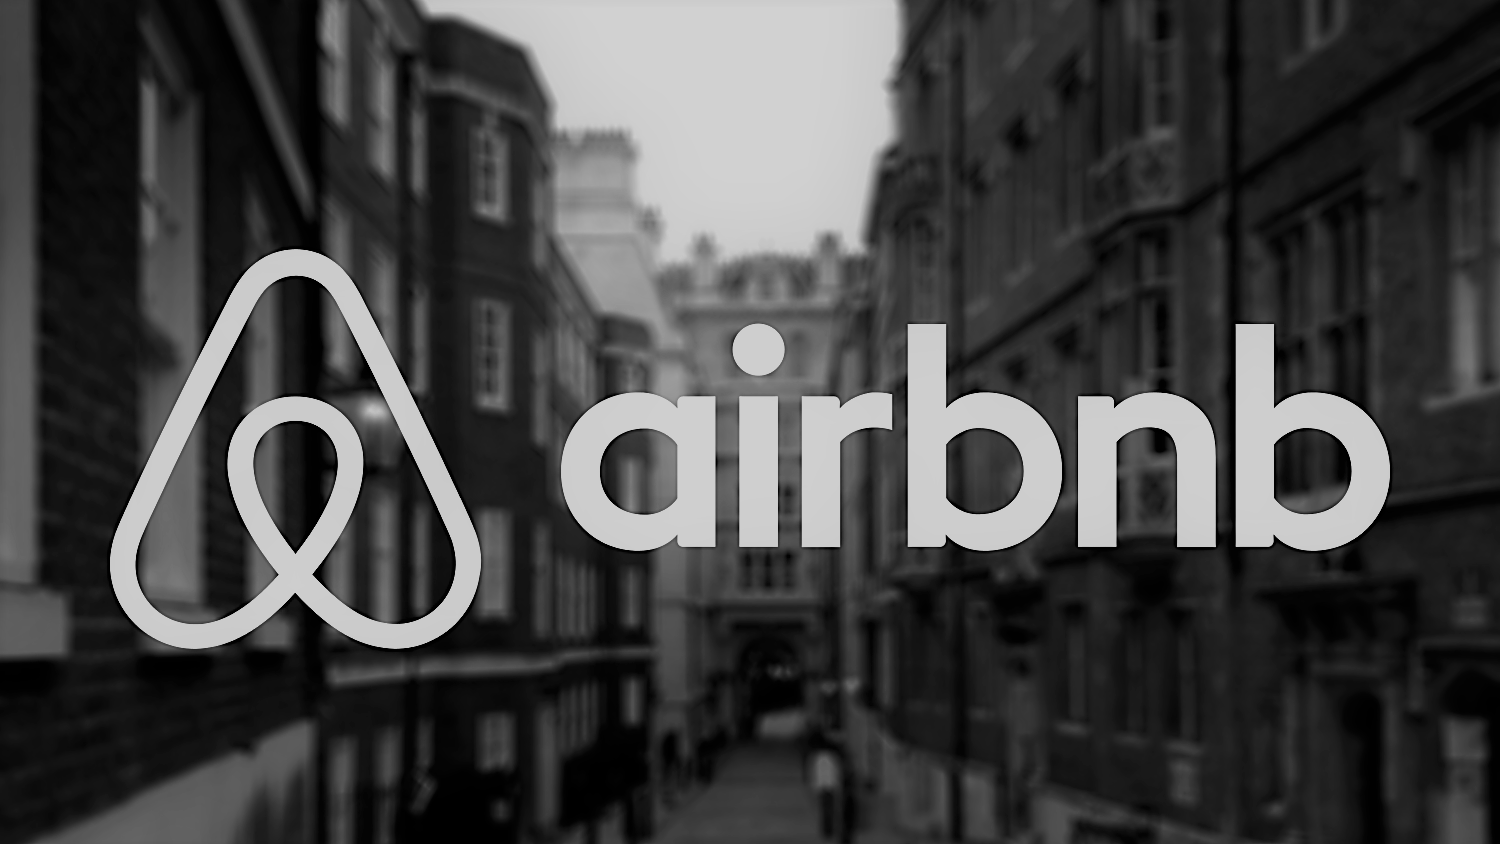 Online travel sites getting squeezed by Airbnb, hotel chains